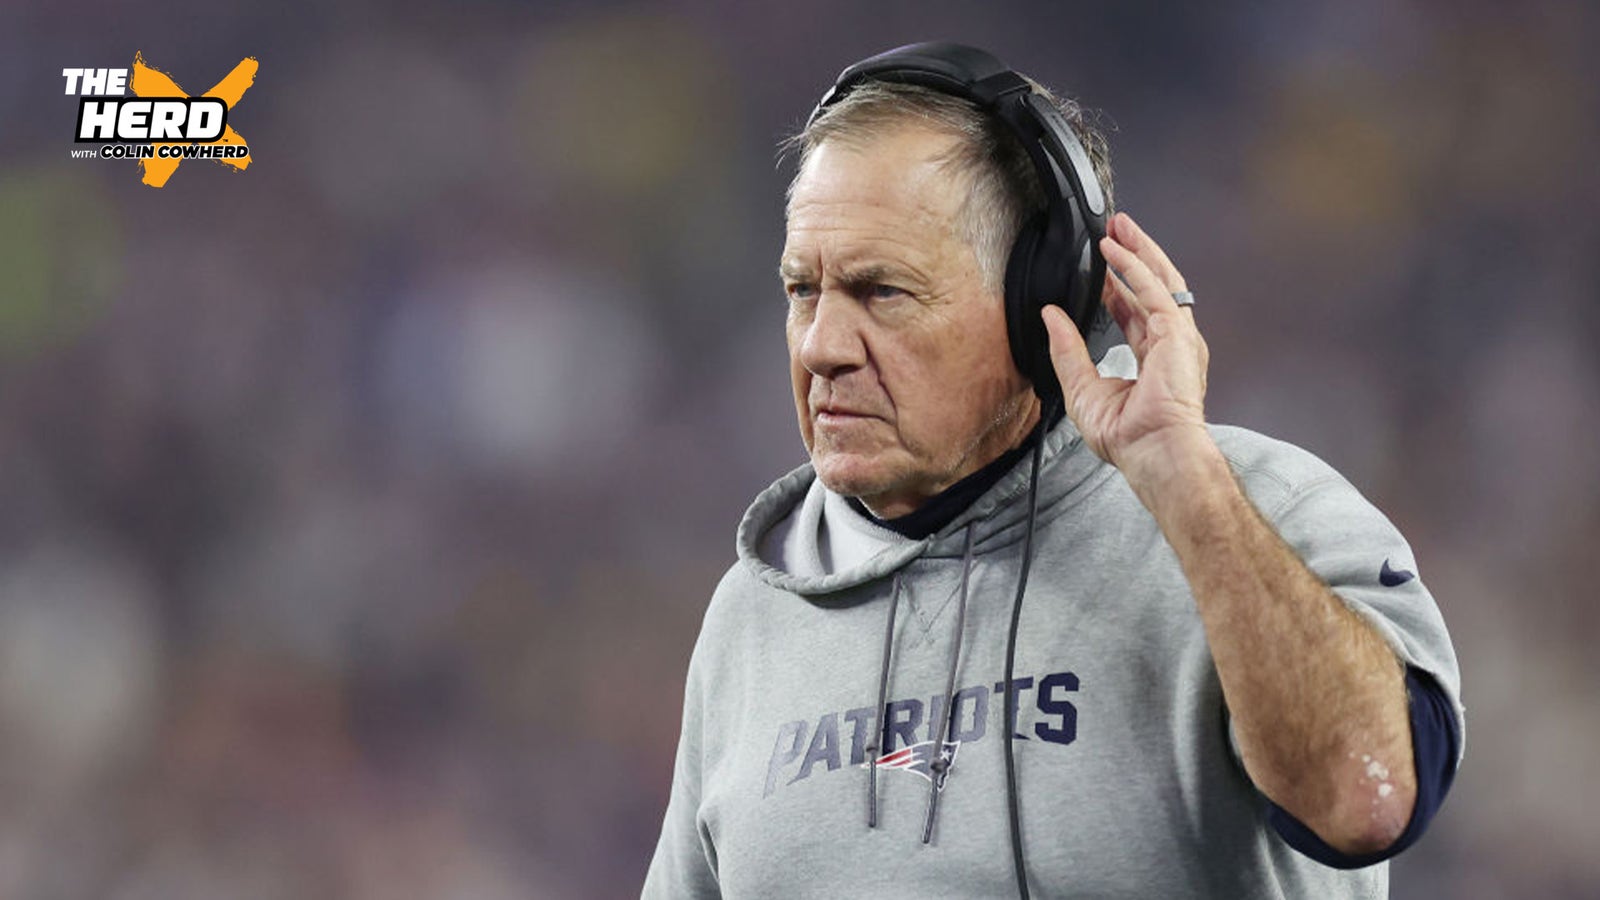 Why Bill Belichick is portrayed as 'Dynasty's' antagonist 